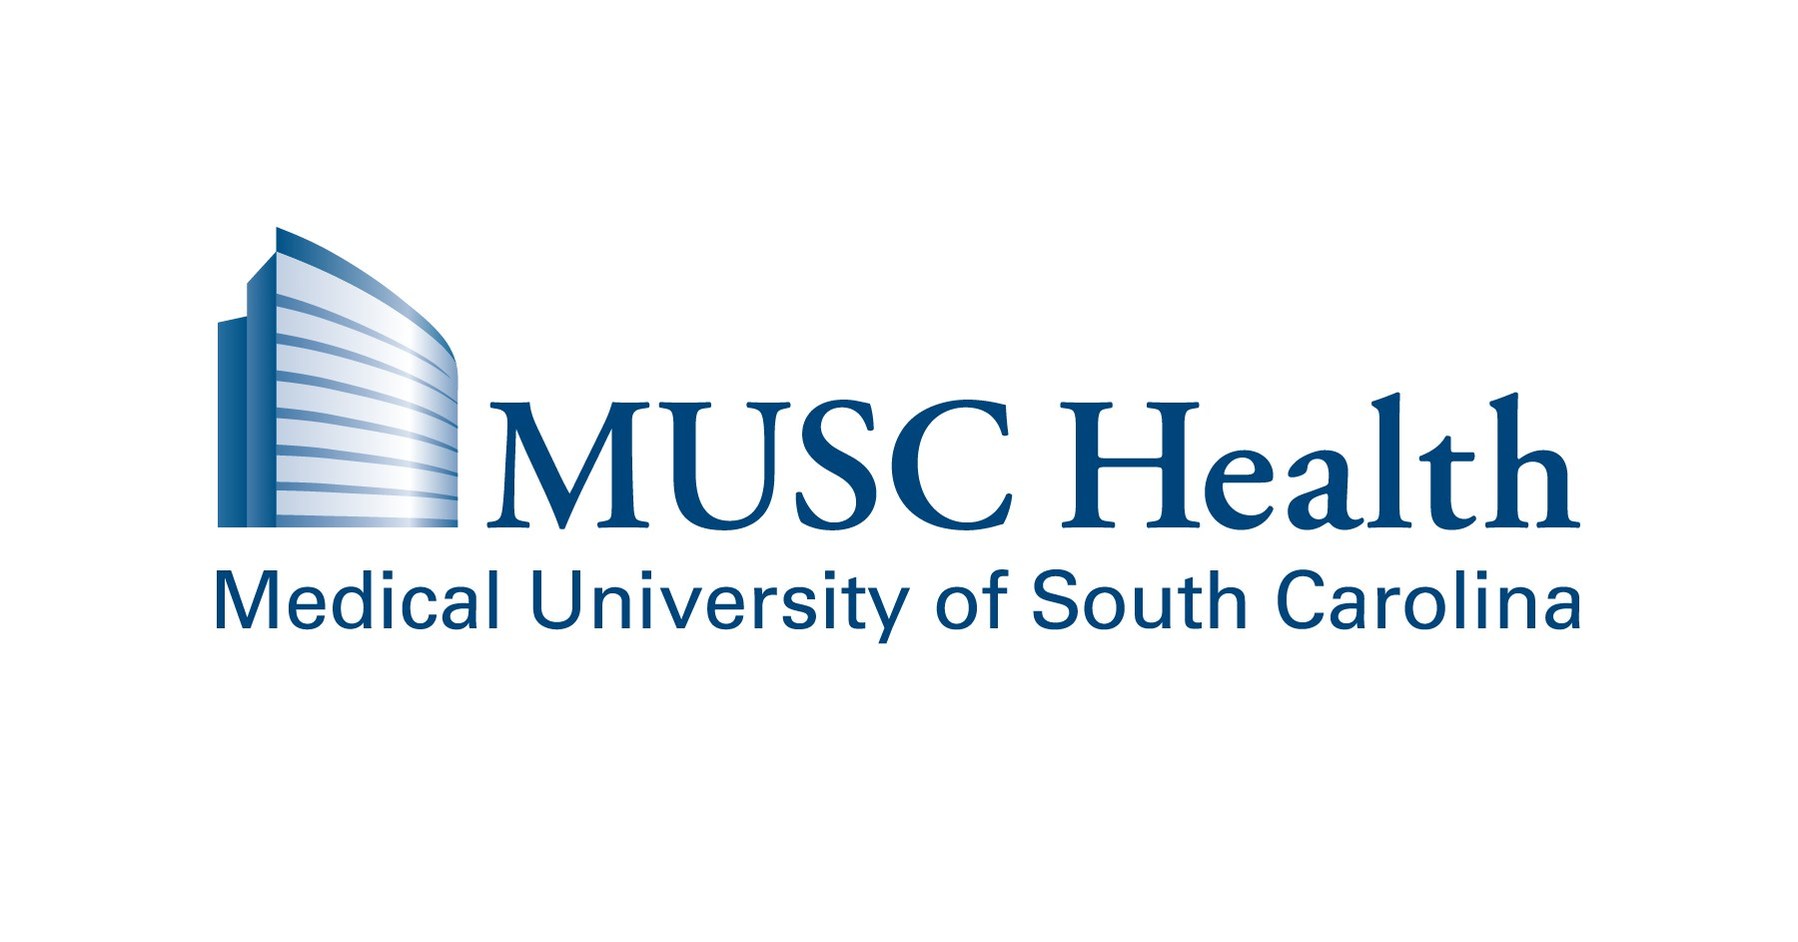 Encompass Health and MUSC Health plan to own and operate Encompass Health  Rehabilitation Hospital of Charleston as a joint venture